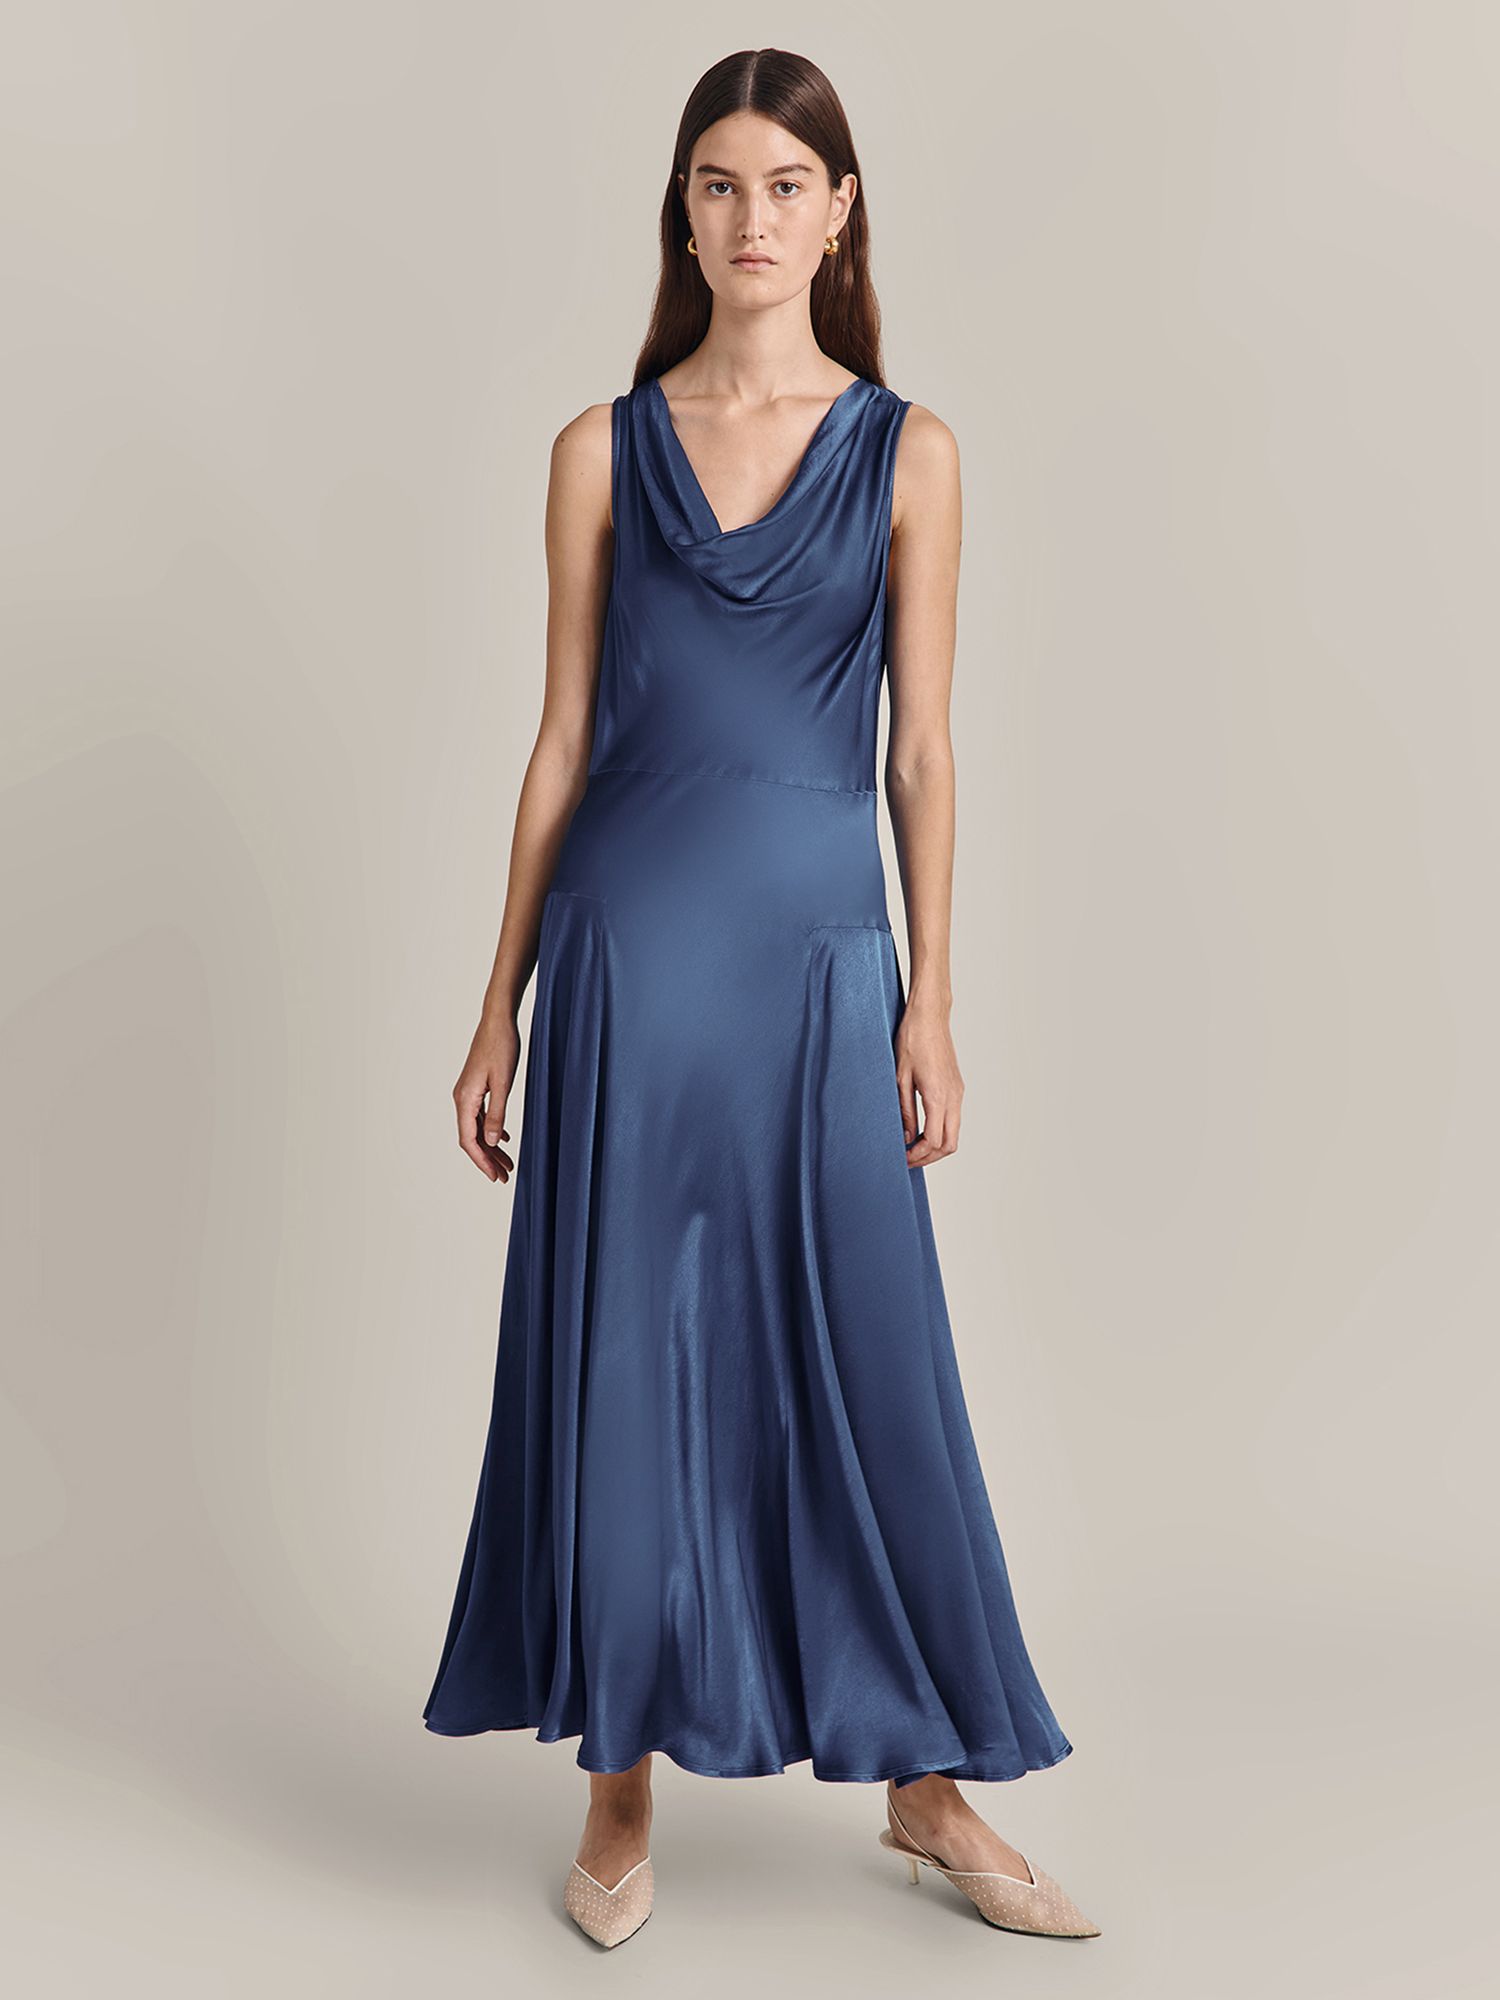 Ghost Evelyn Dress, Blue at John Lewis & Partners